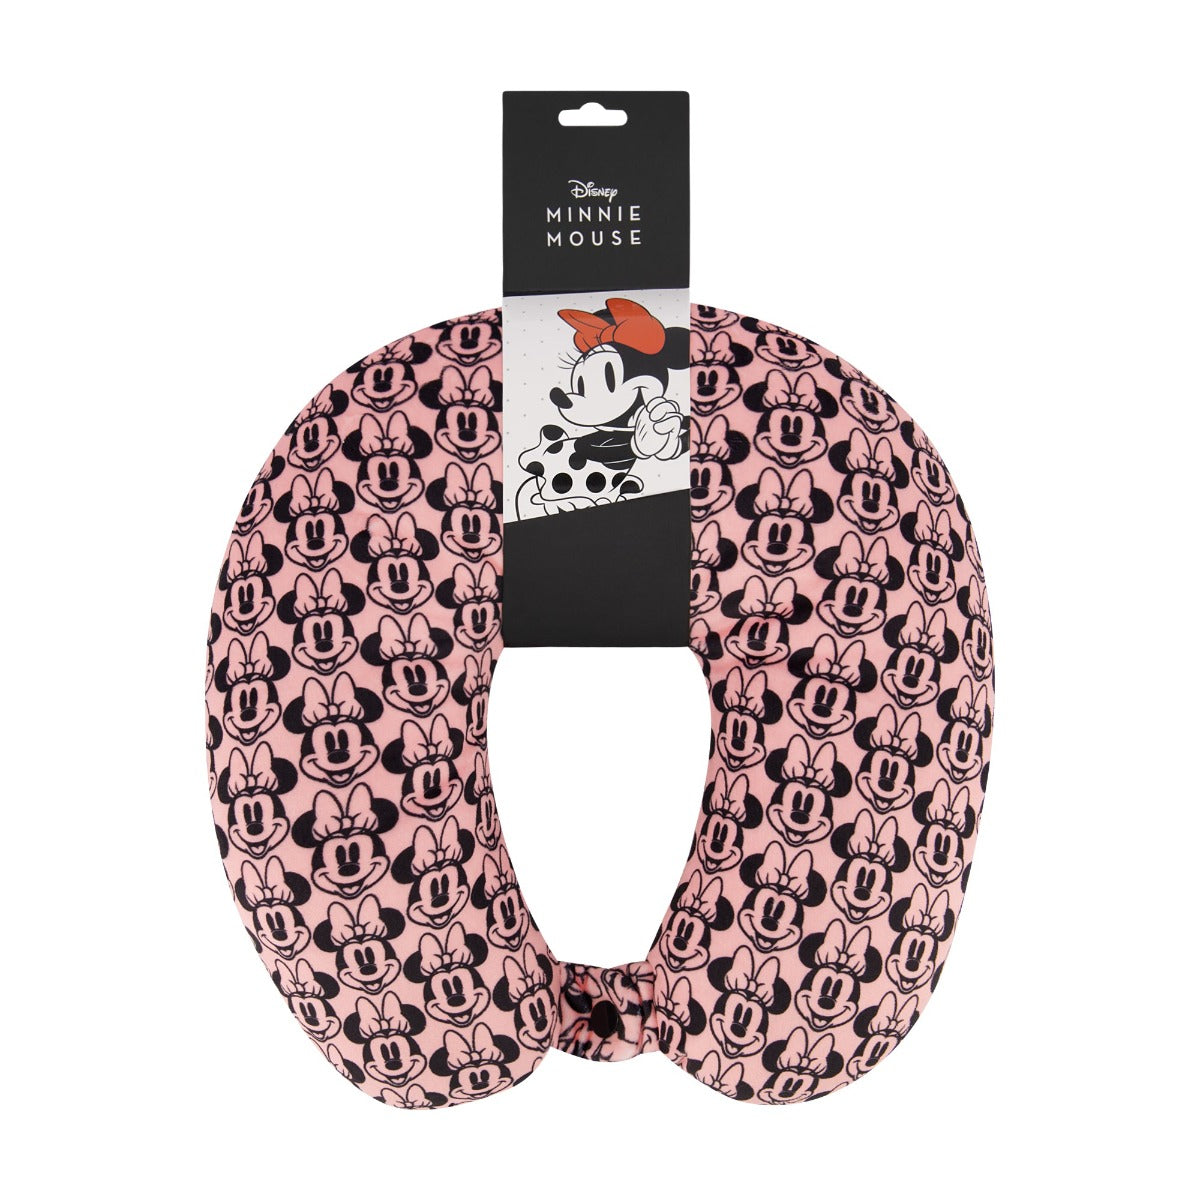 Ful disney minnie mouse neck pillow pink and black - best travel pillows for long trips